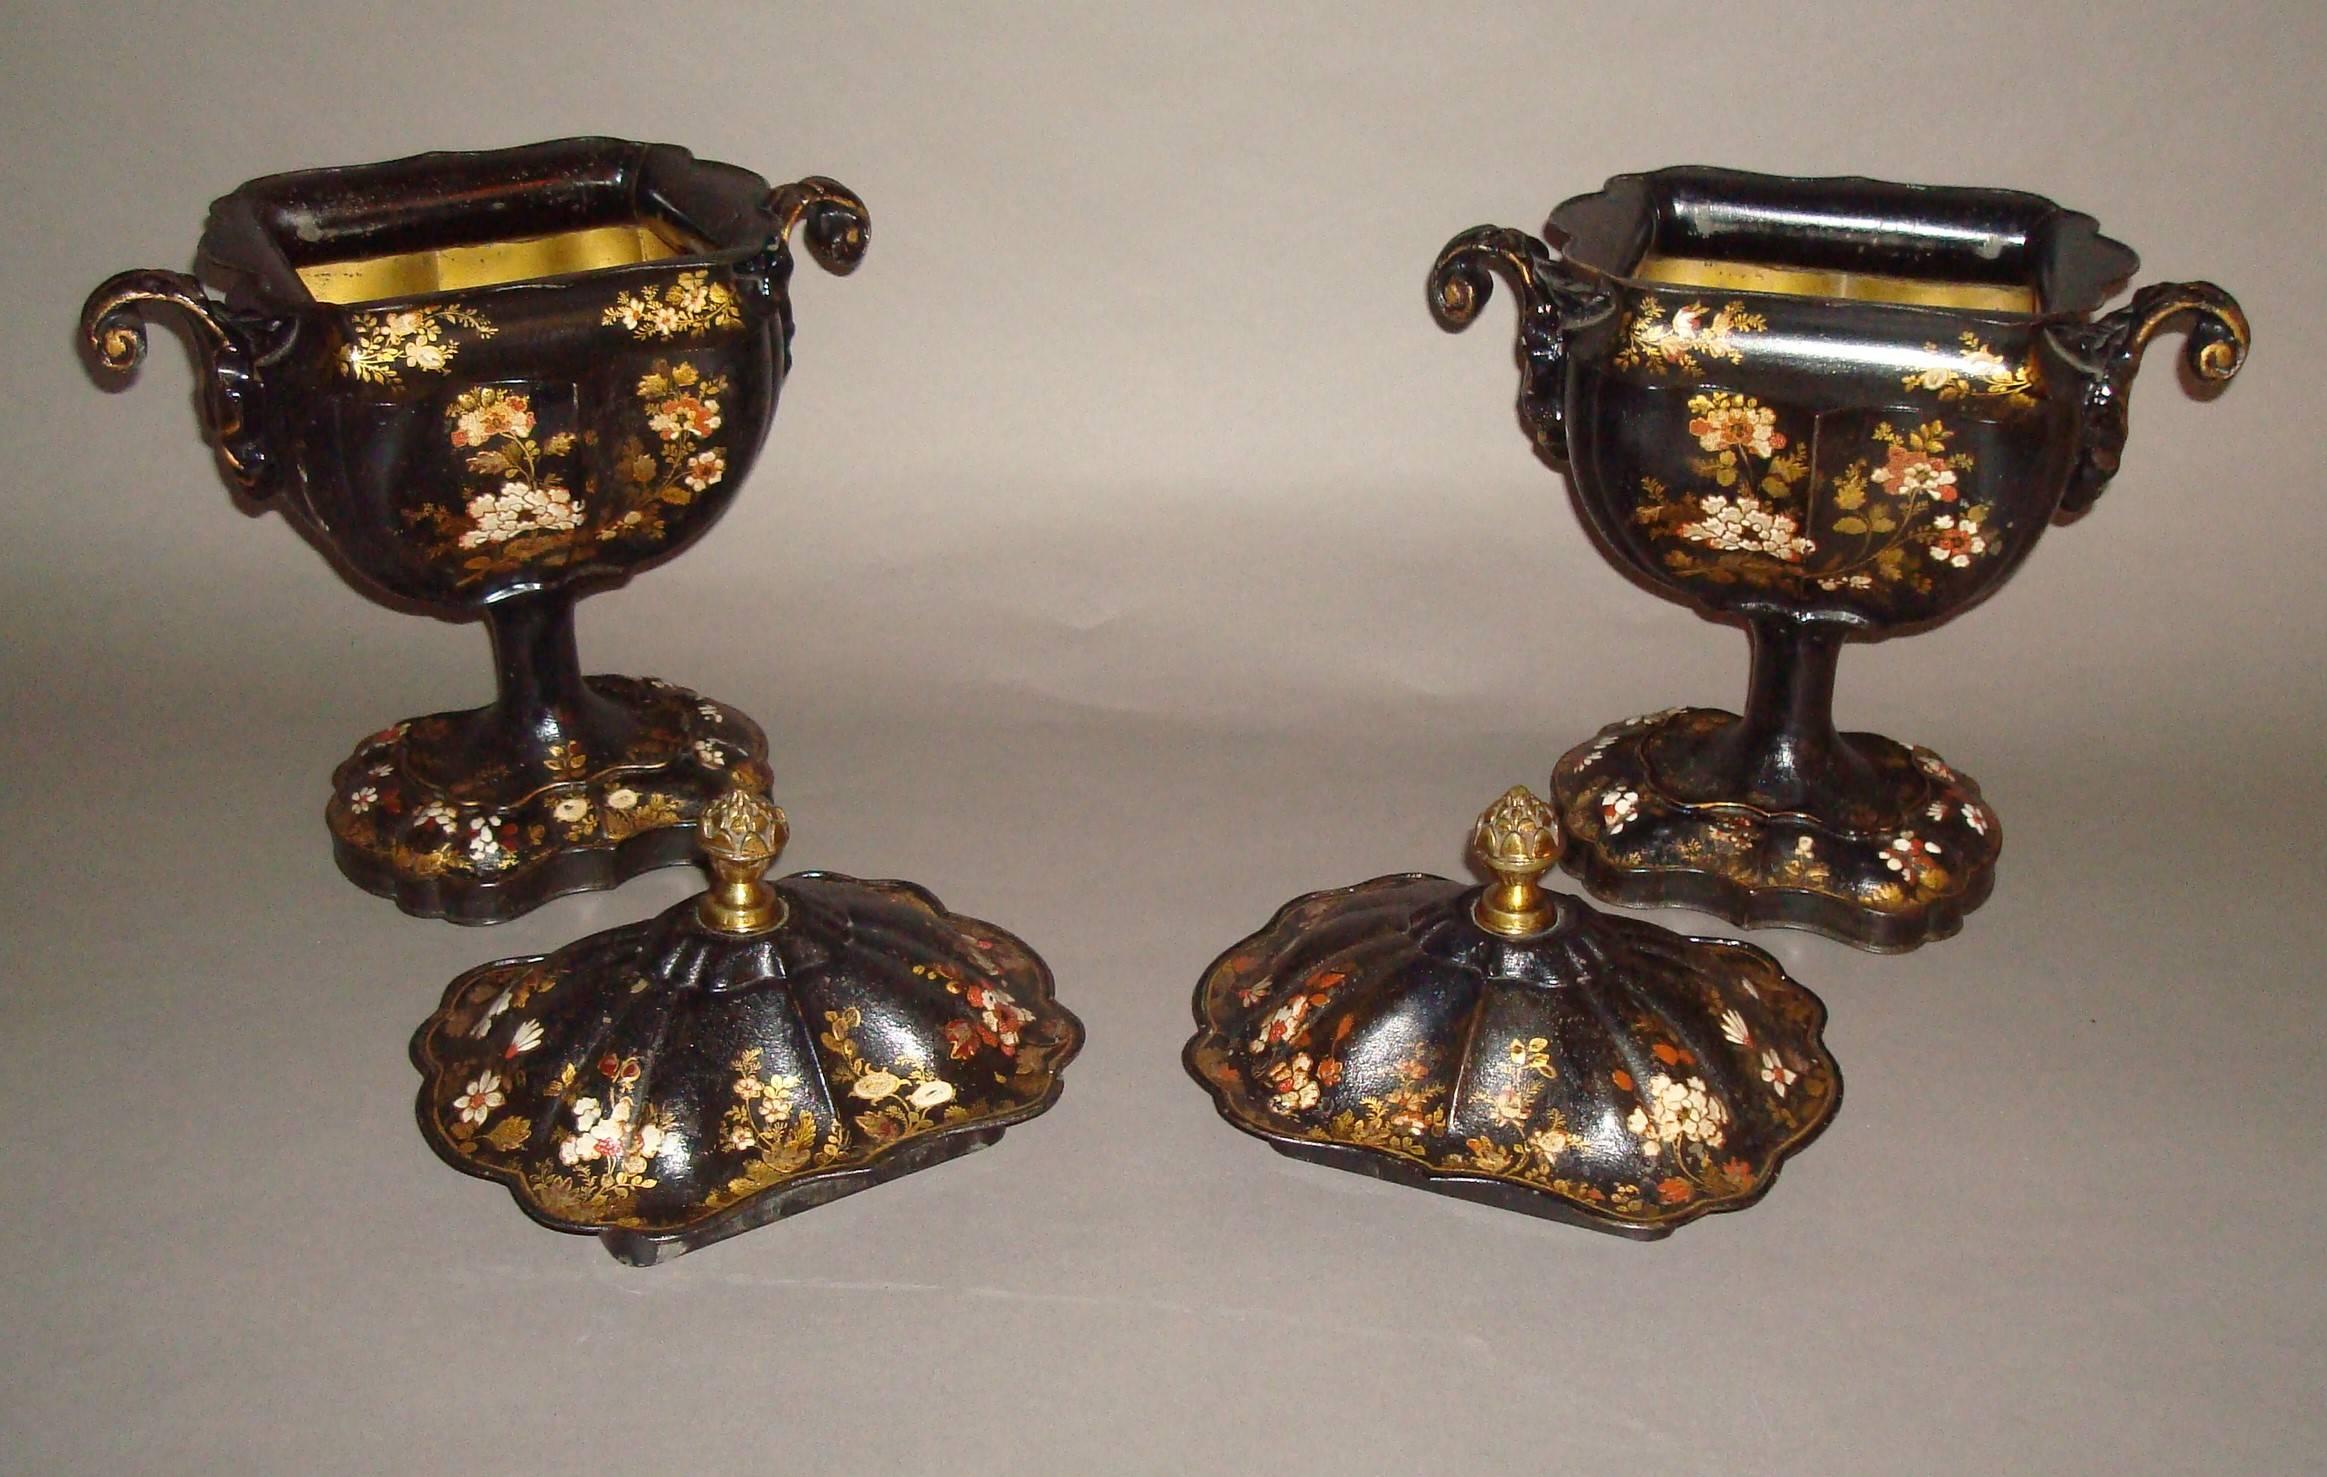 A good Regency pair of tole chestnut urns of unusual design; the scalloped shaped rectangular lids with an ornate brass finial above the shaped urns with acanthus scroll side carrying handles, supported on a similarly shaped plinth. All finely